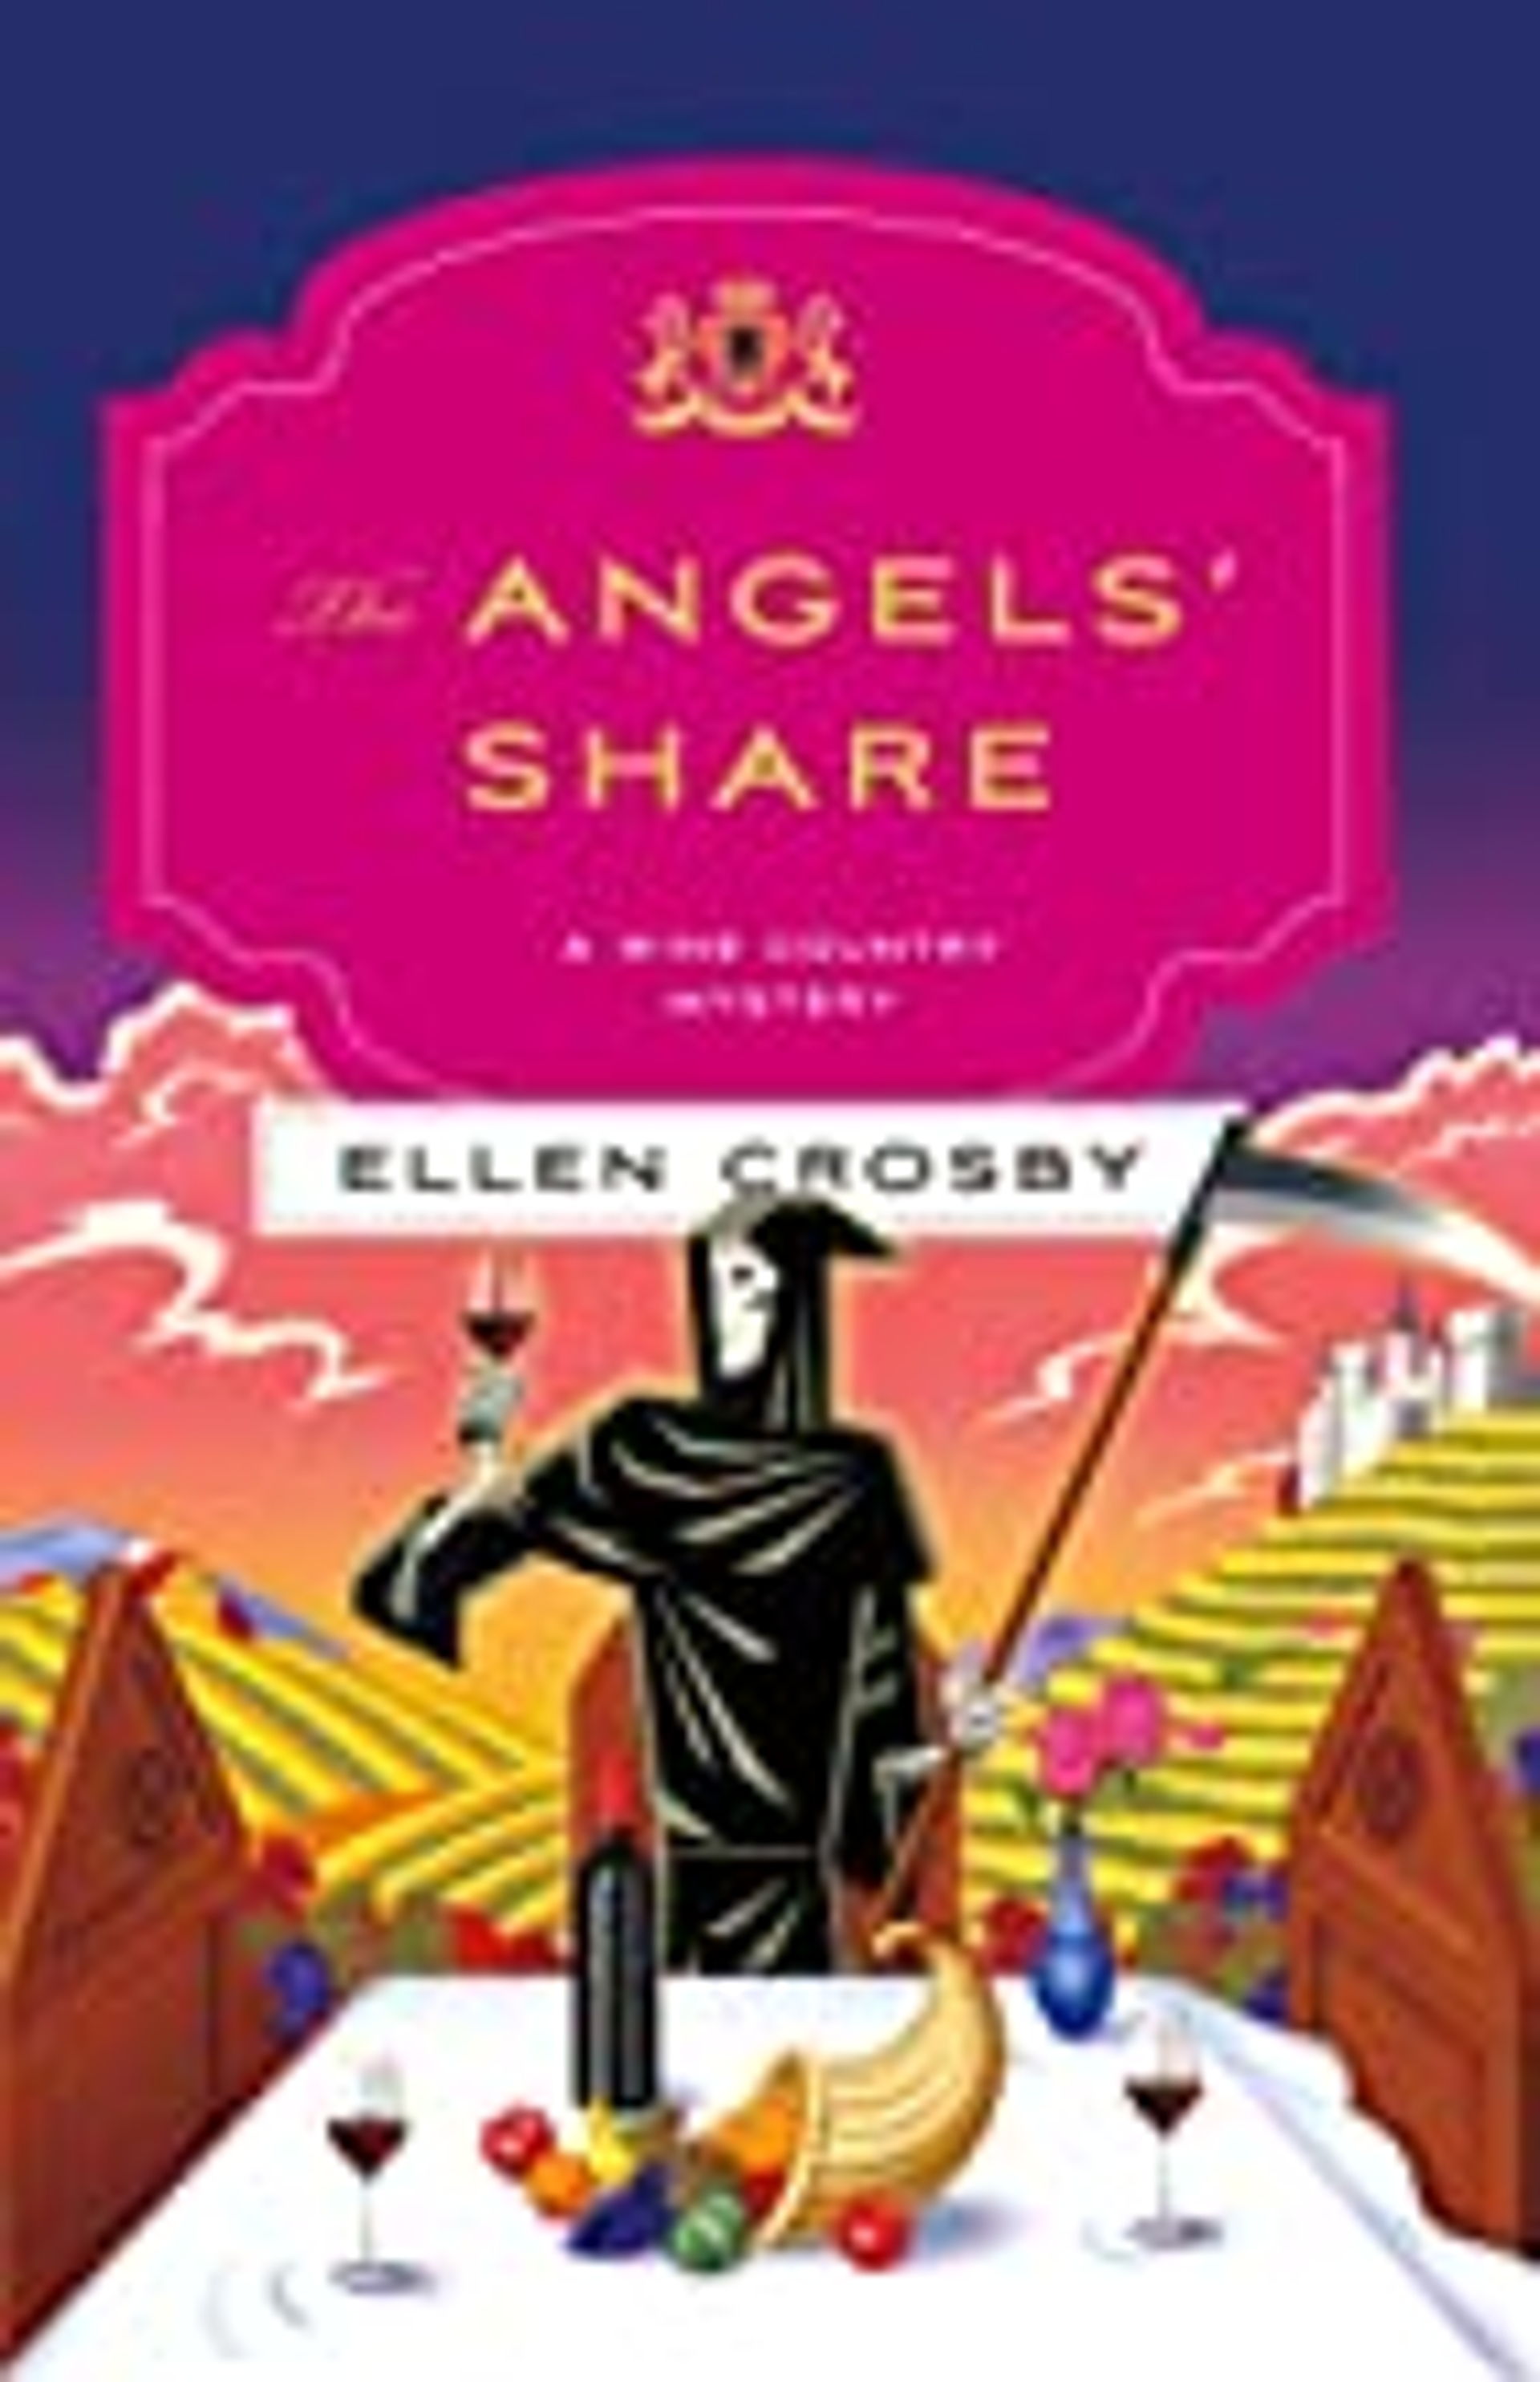 The Angels' Share, a Wine Country Mystery by Ellen Crosby